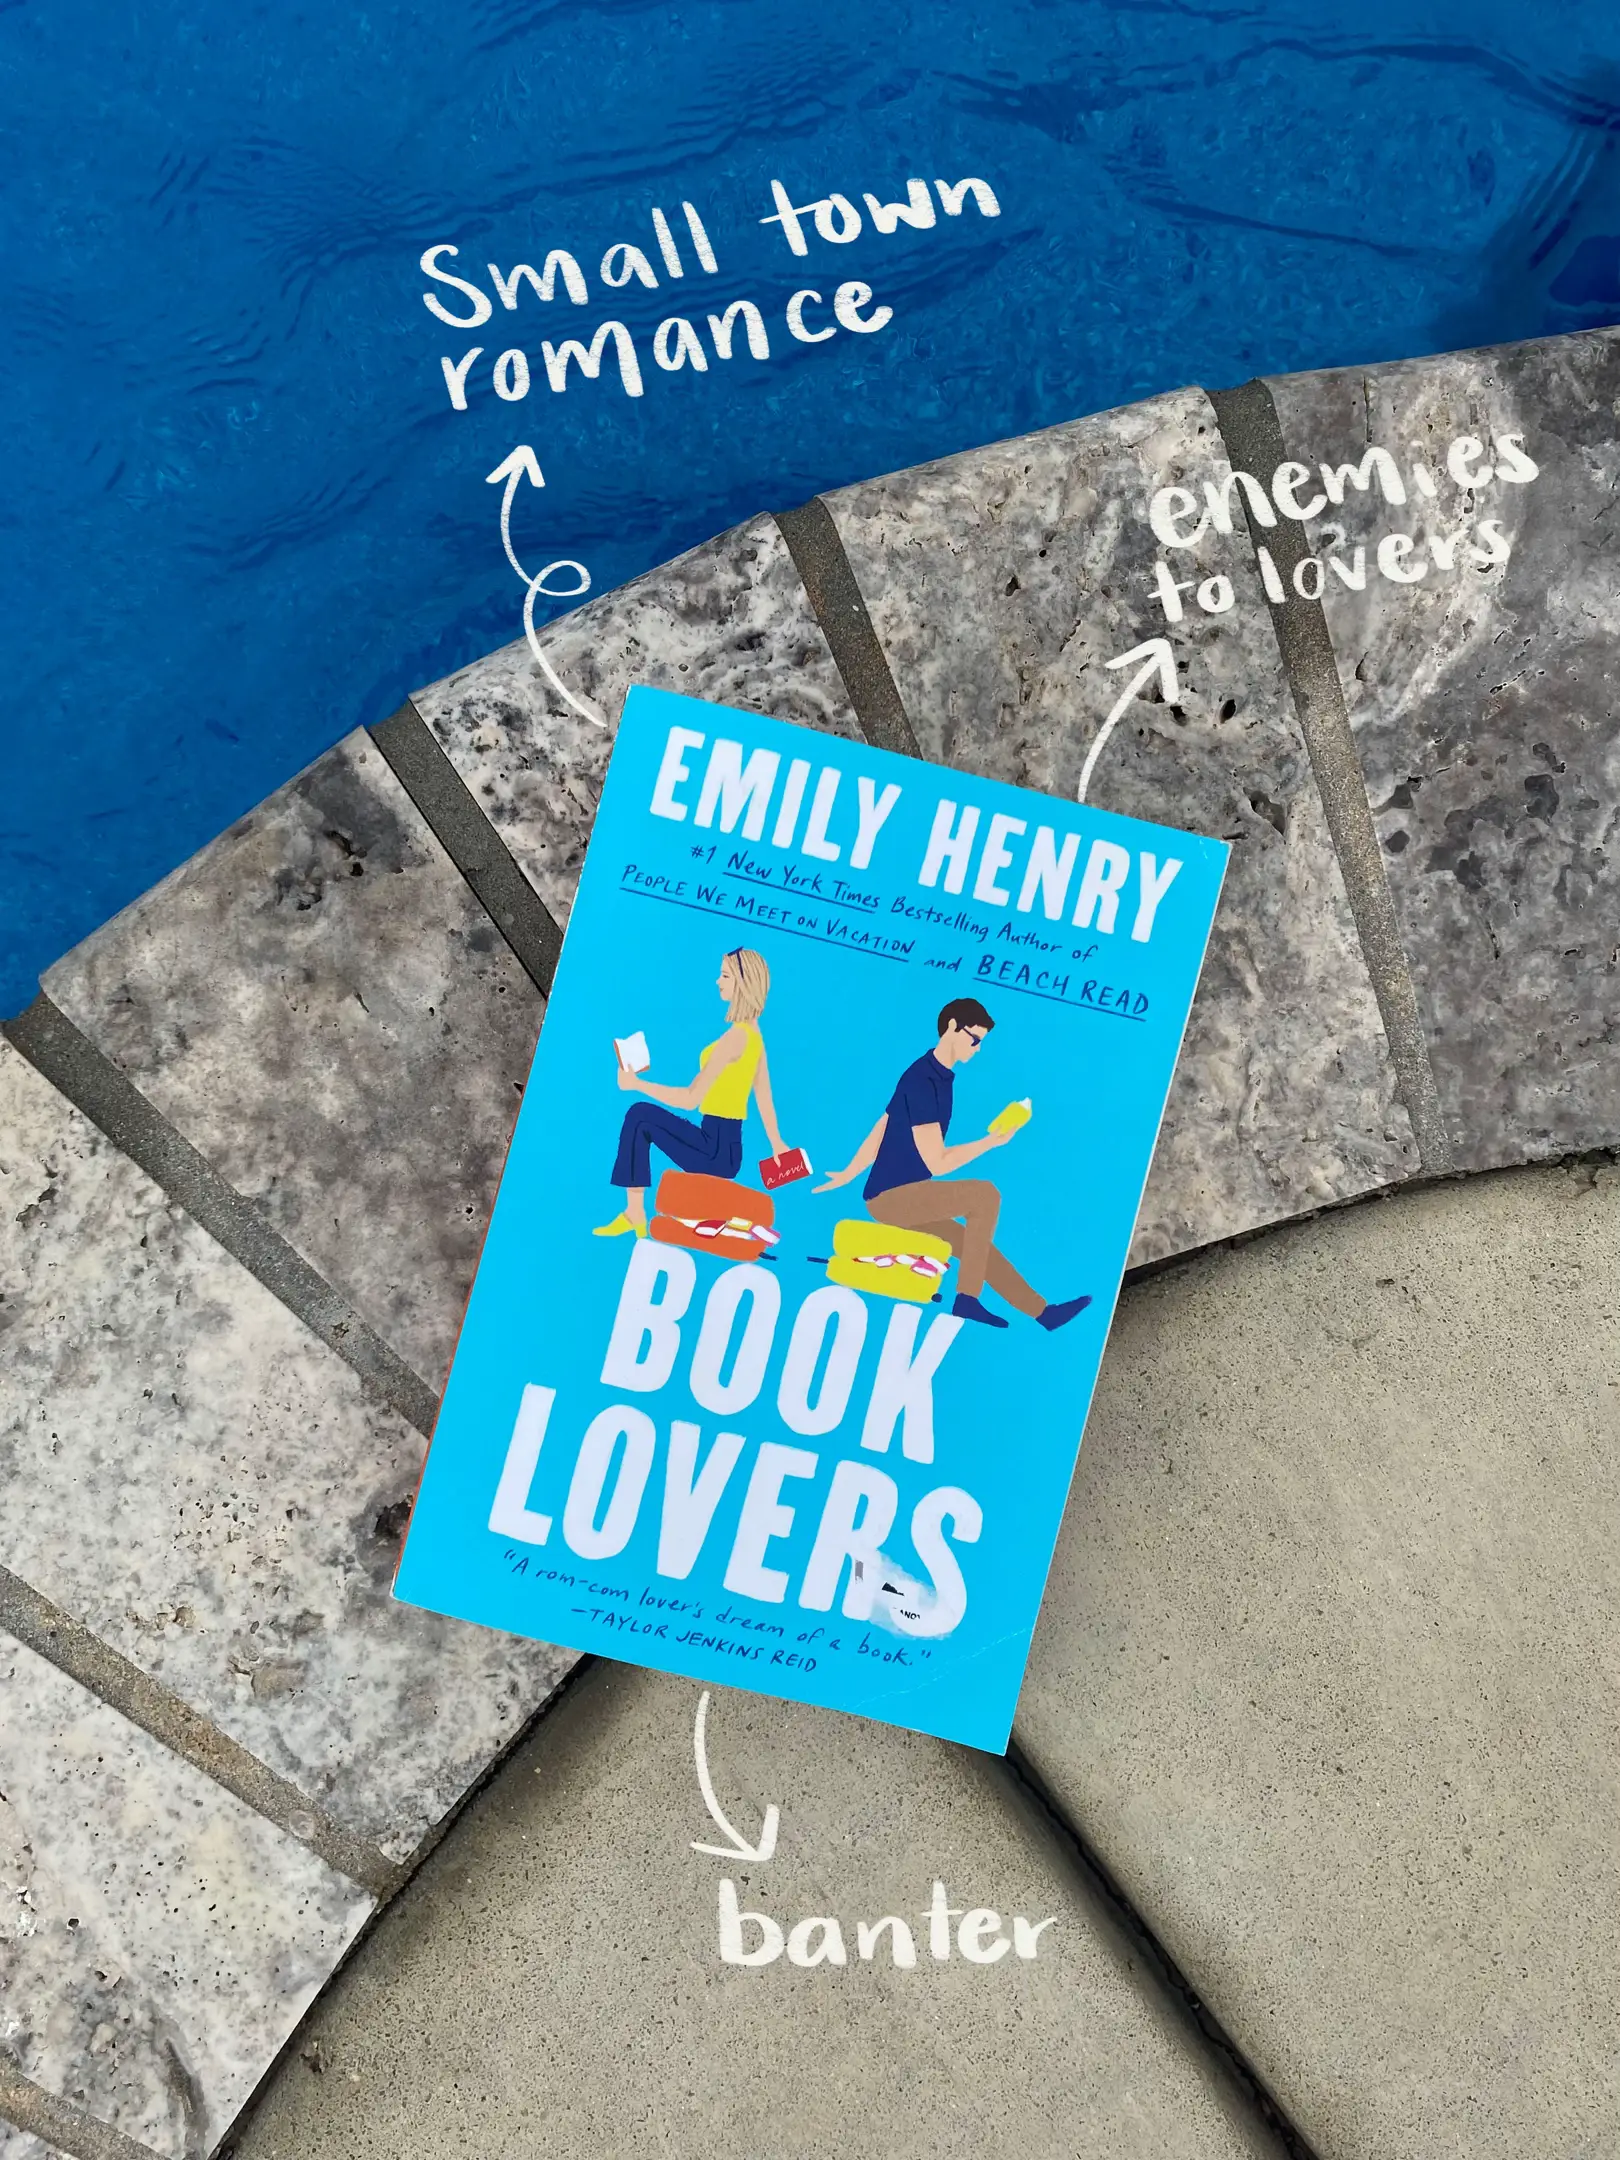 Book Recommendations from the Book Lovers Themselves: An Exclusive Guest  Post from Emily Henry, Author of Book Lovers - B&N Reads